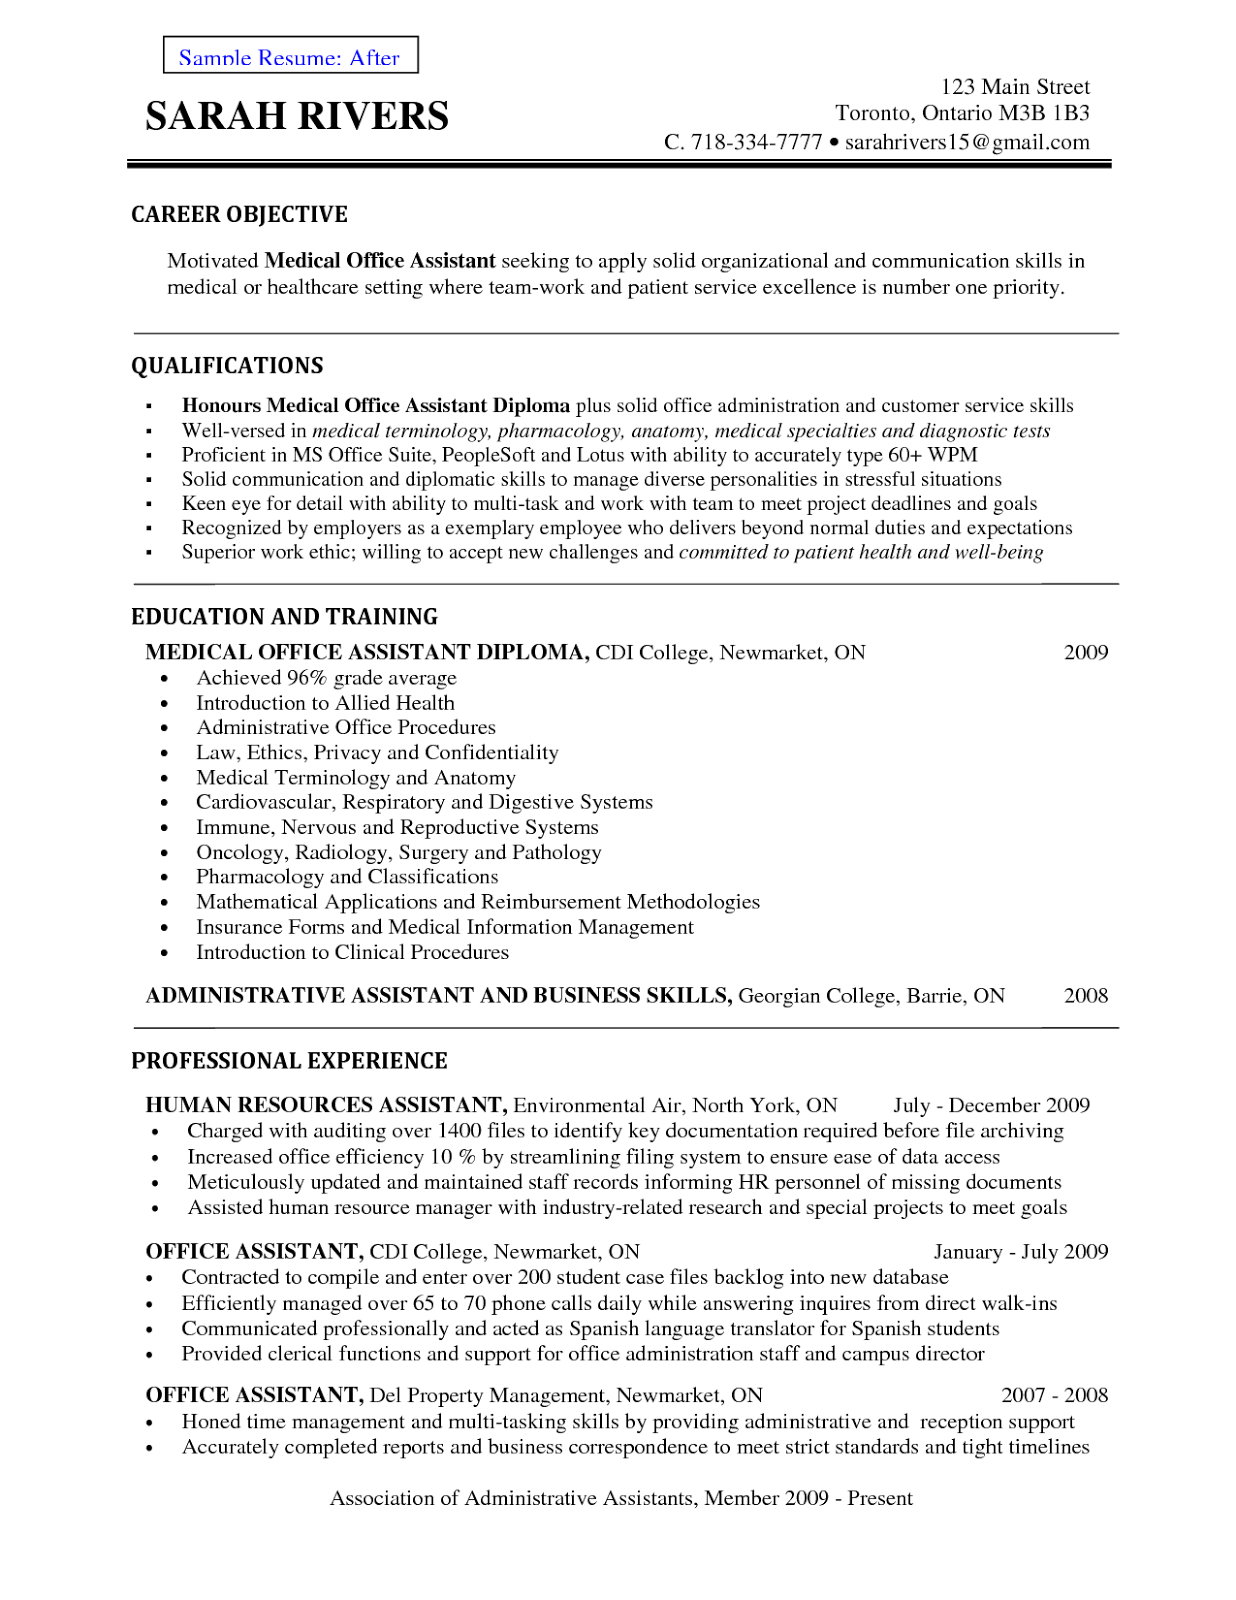 Tufts career services sample resume